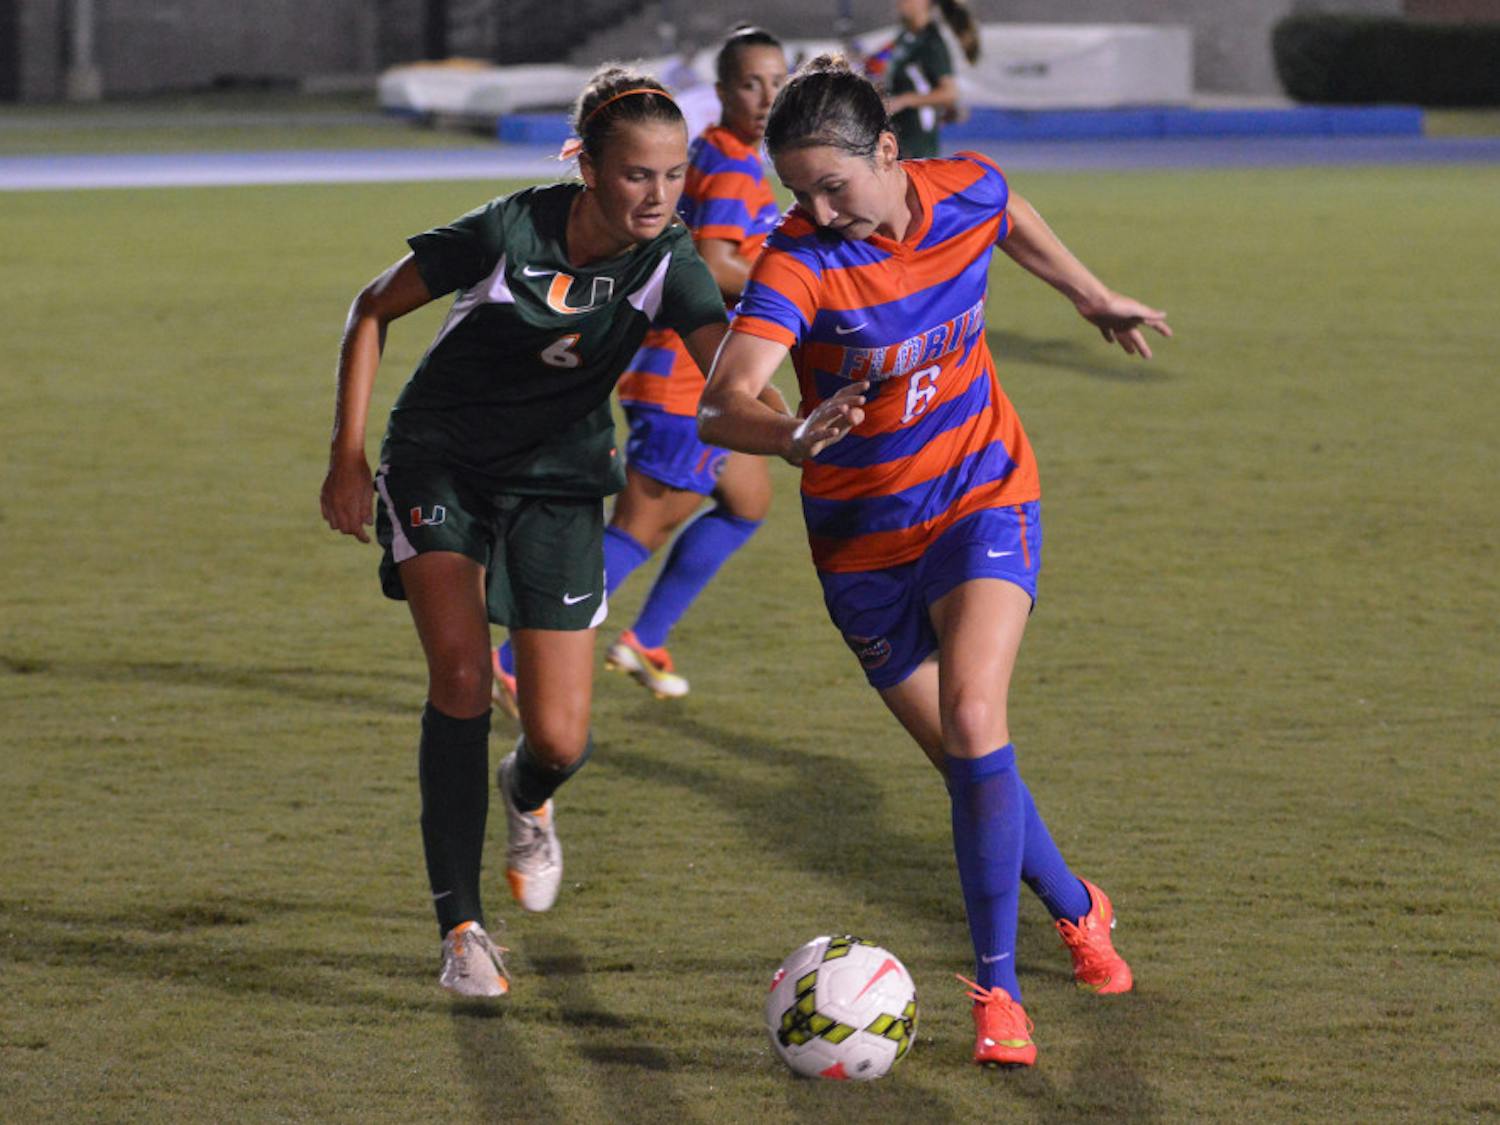 Junior midfielder Lauren Smith dribbles the ball during Florida's 3-0 win against Miami on August 22, 2014, at James G. Pressly Stadium.